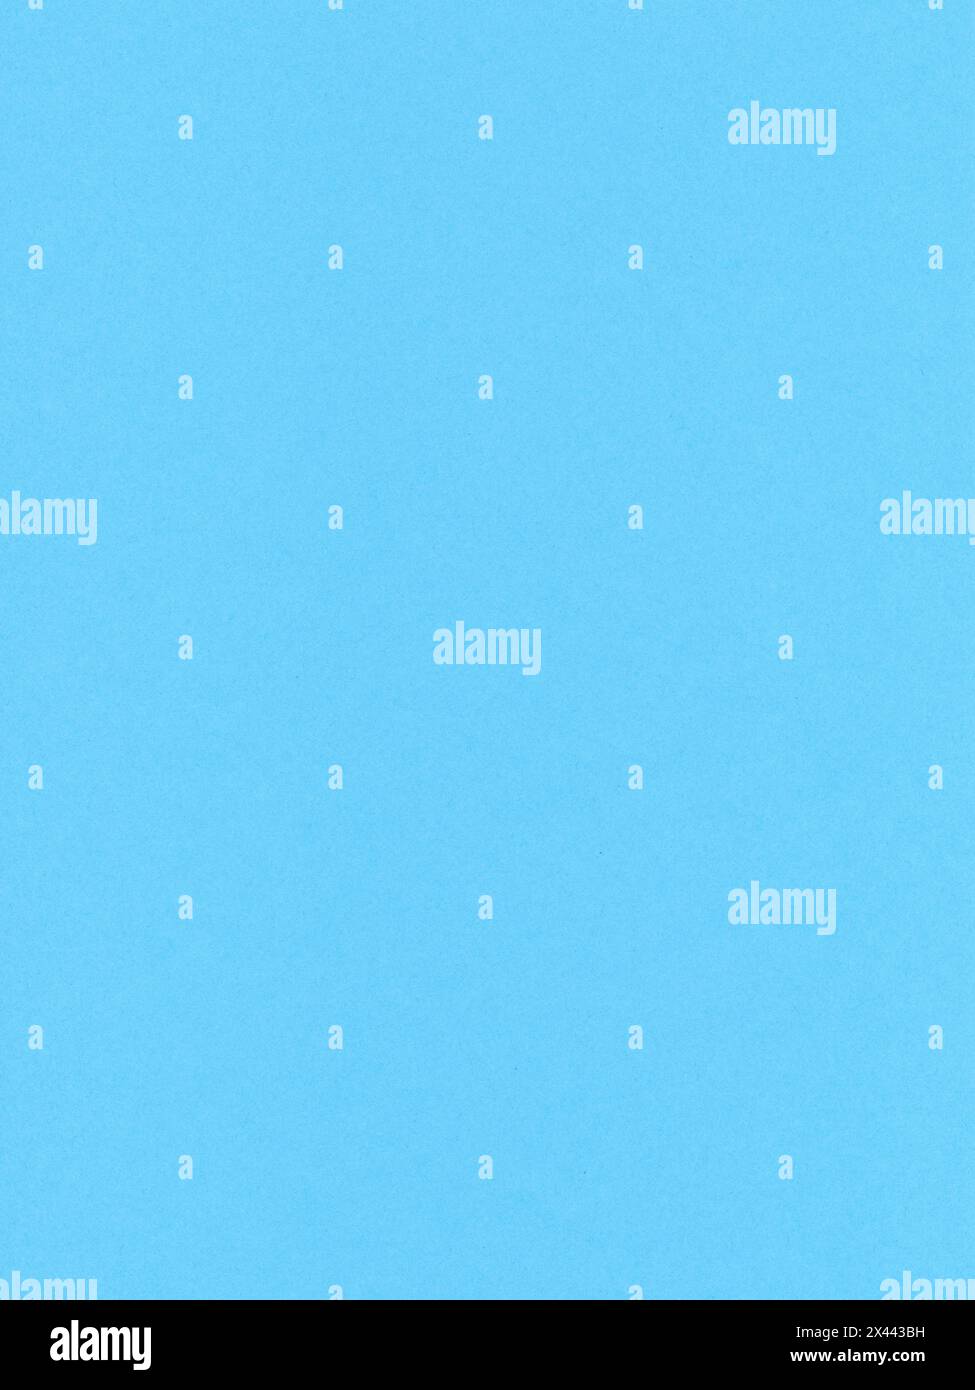 Texture of colored paper, surface of a light blue sheet of paper Stock Photo